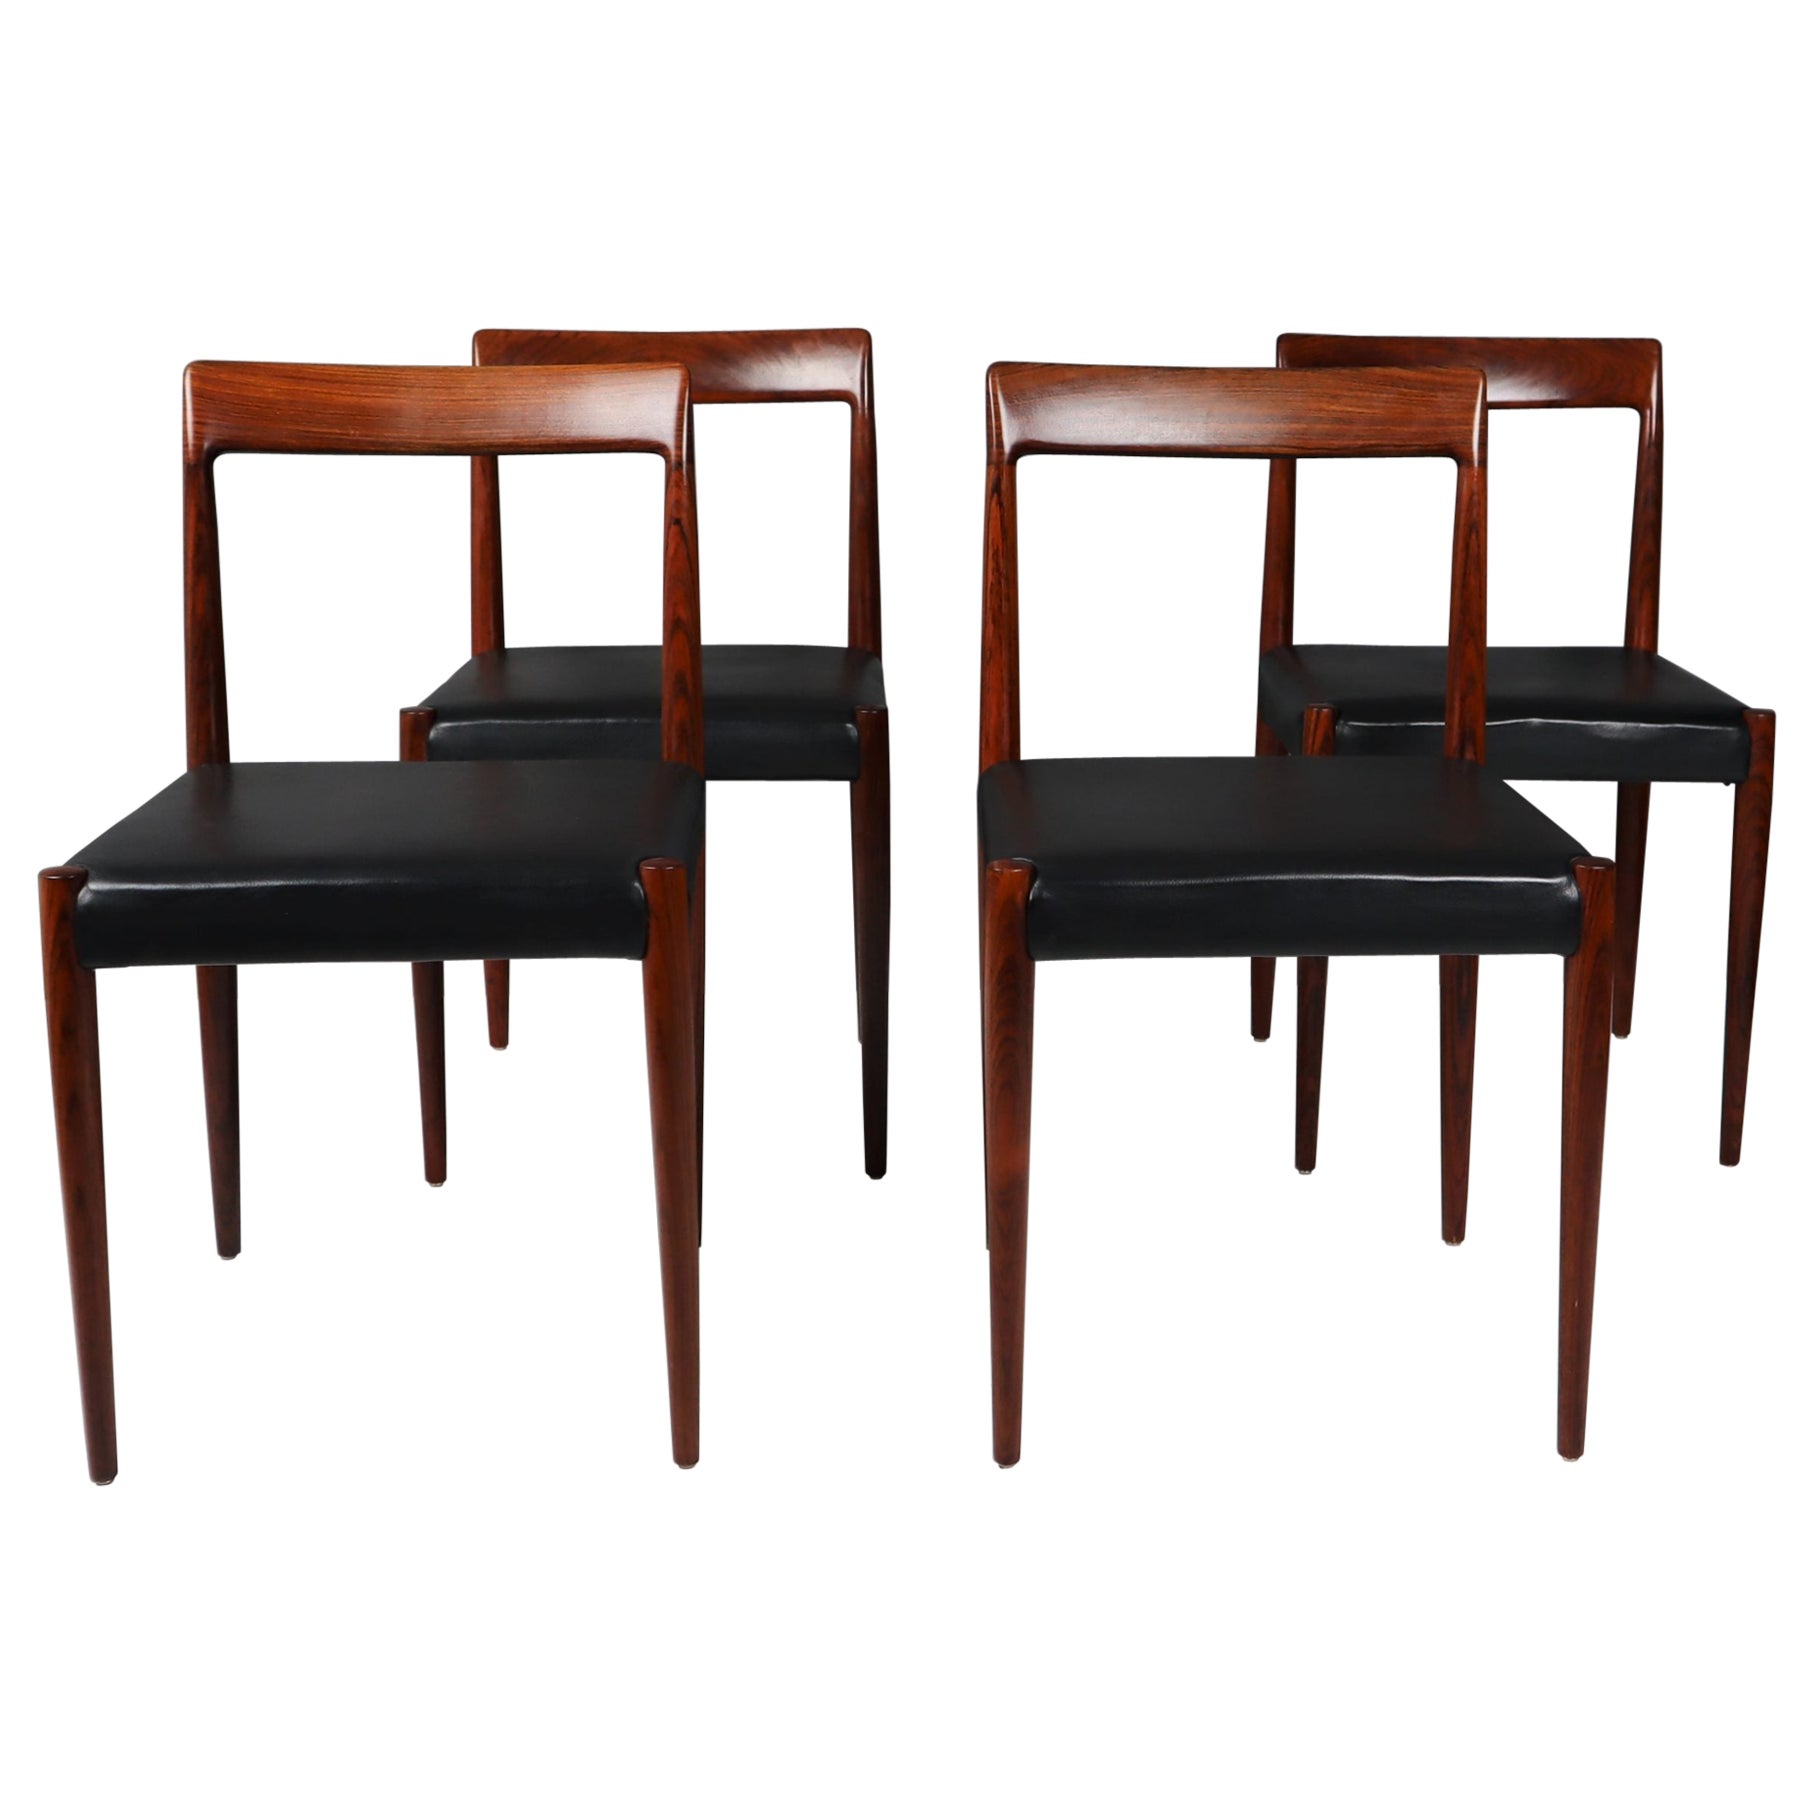 Midcentury Rosewood Chairs from Lübke For Sale